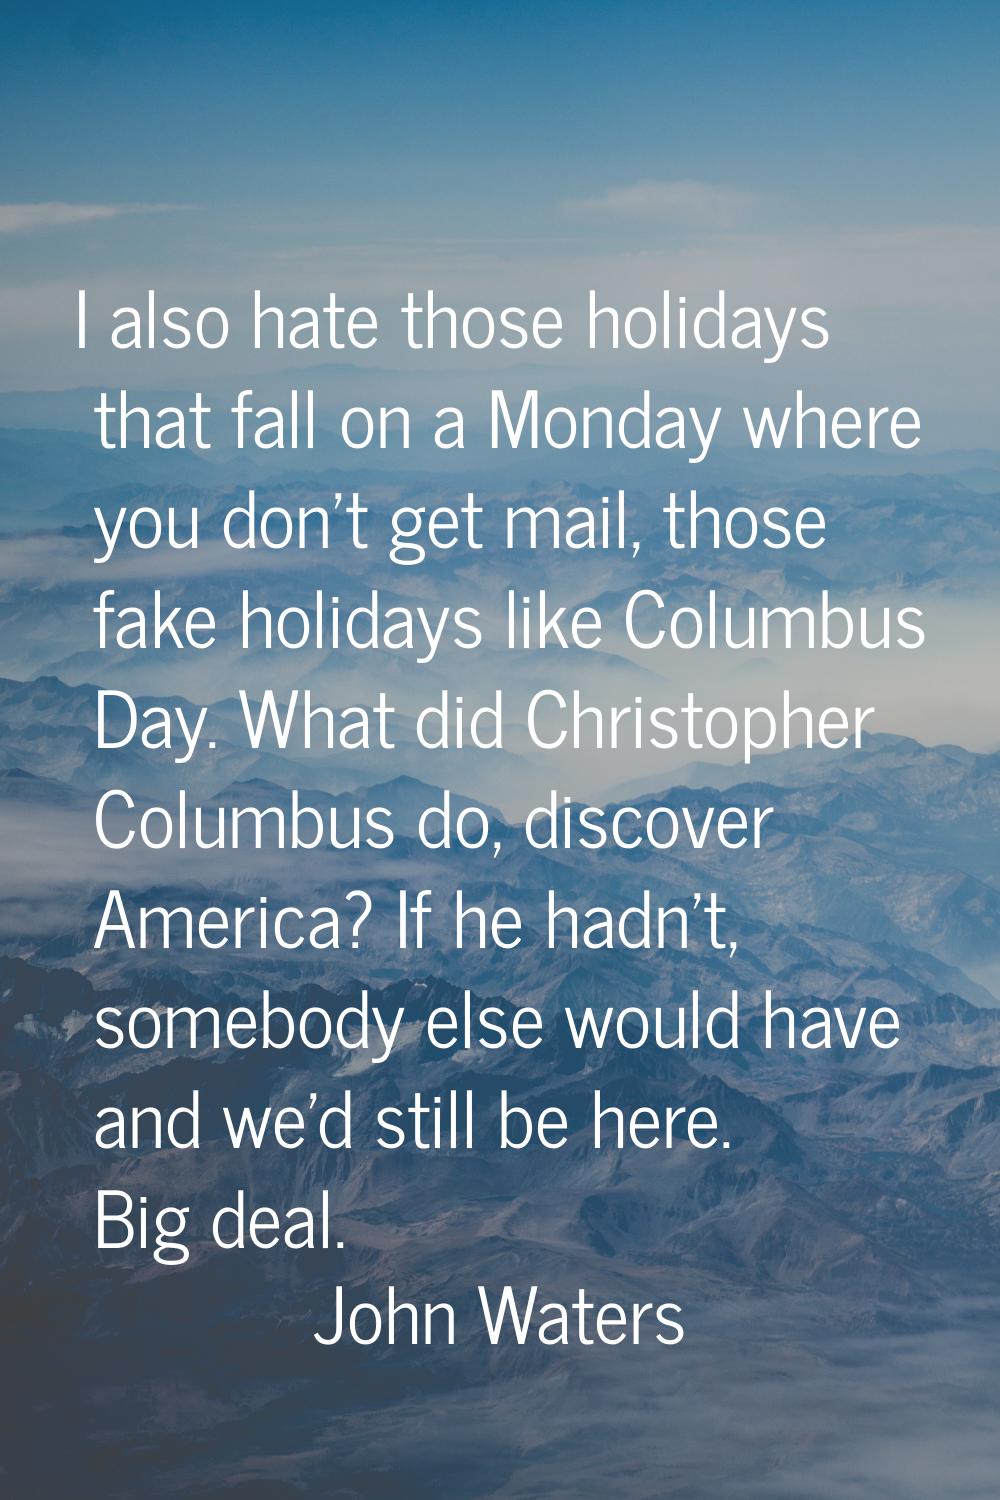 I also hate those holidays that fall on a Monday where you don't get mail, those fake holidays like